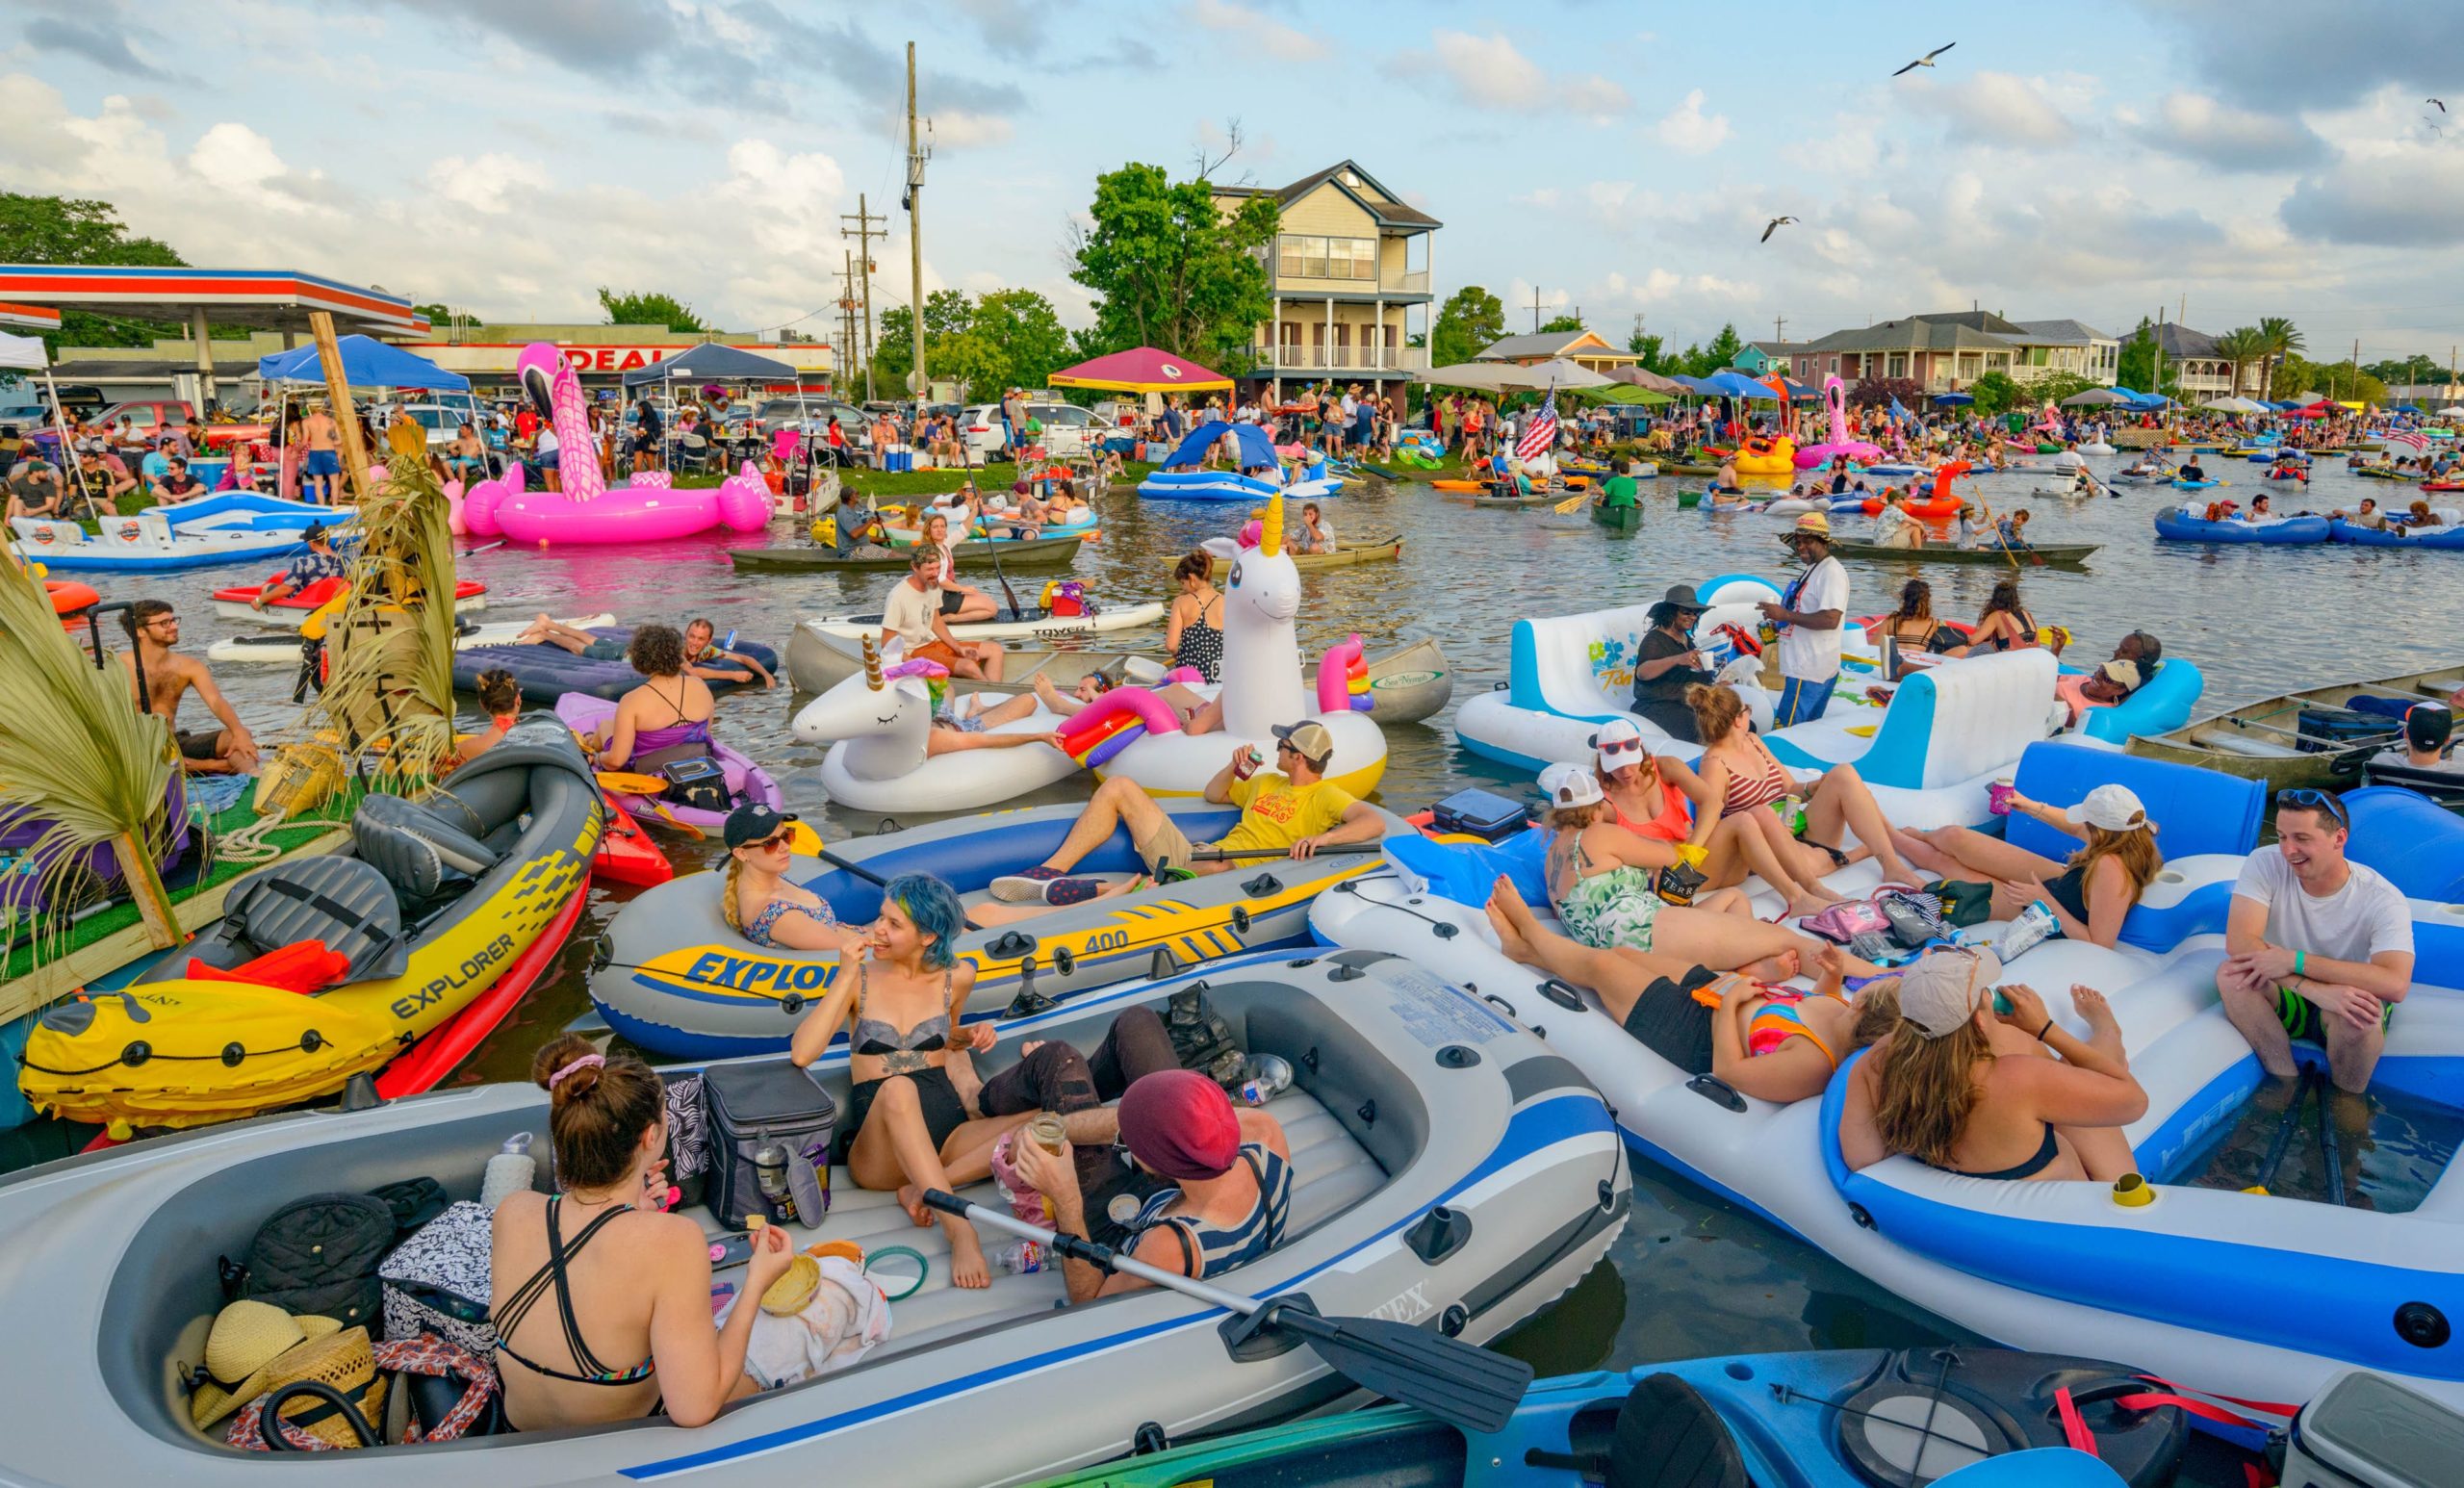 People float on Bayou St. John during the Mid-City Bayou Boogaloo in New Orleans, La. Saturday, May 18, 2019. Described as a mini-Jazz Fest the now three day festival features New Orleans music, art, cuisine and culture. The event was created in 2006 to reinvigorate the Mid City neighborhood after Hurricane Katrina. Photo by Matthew Hinton